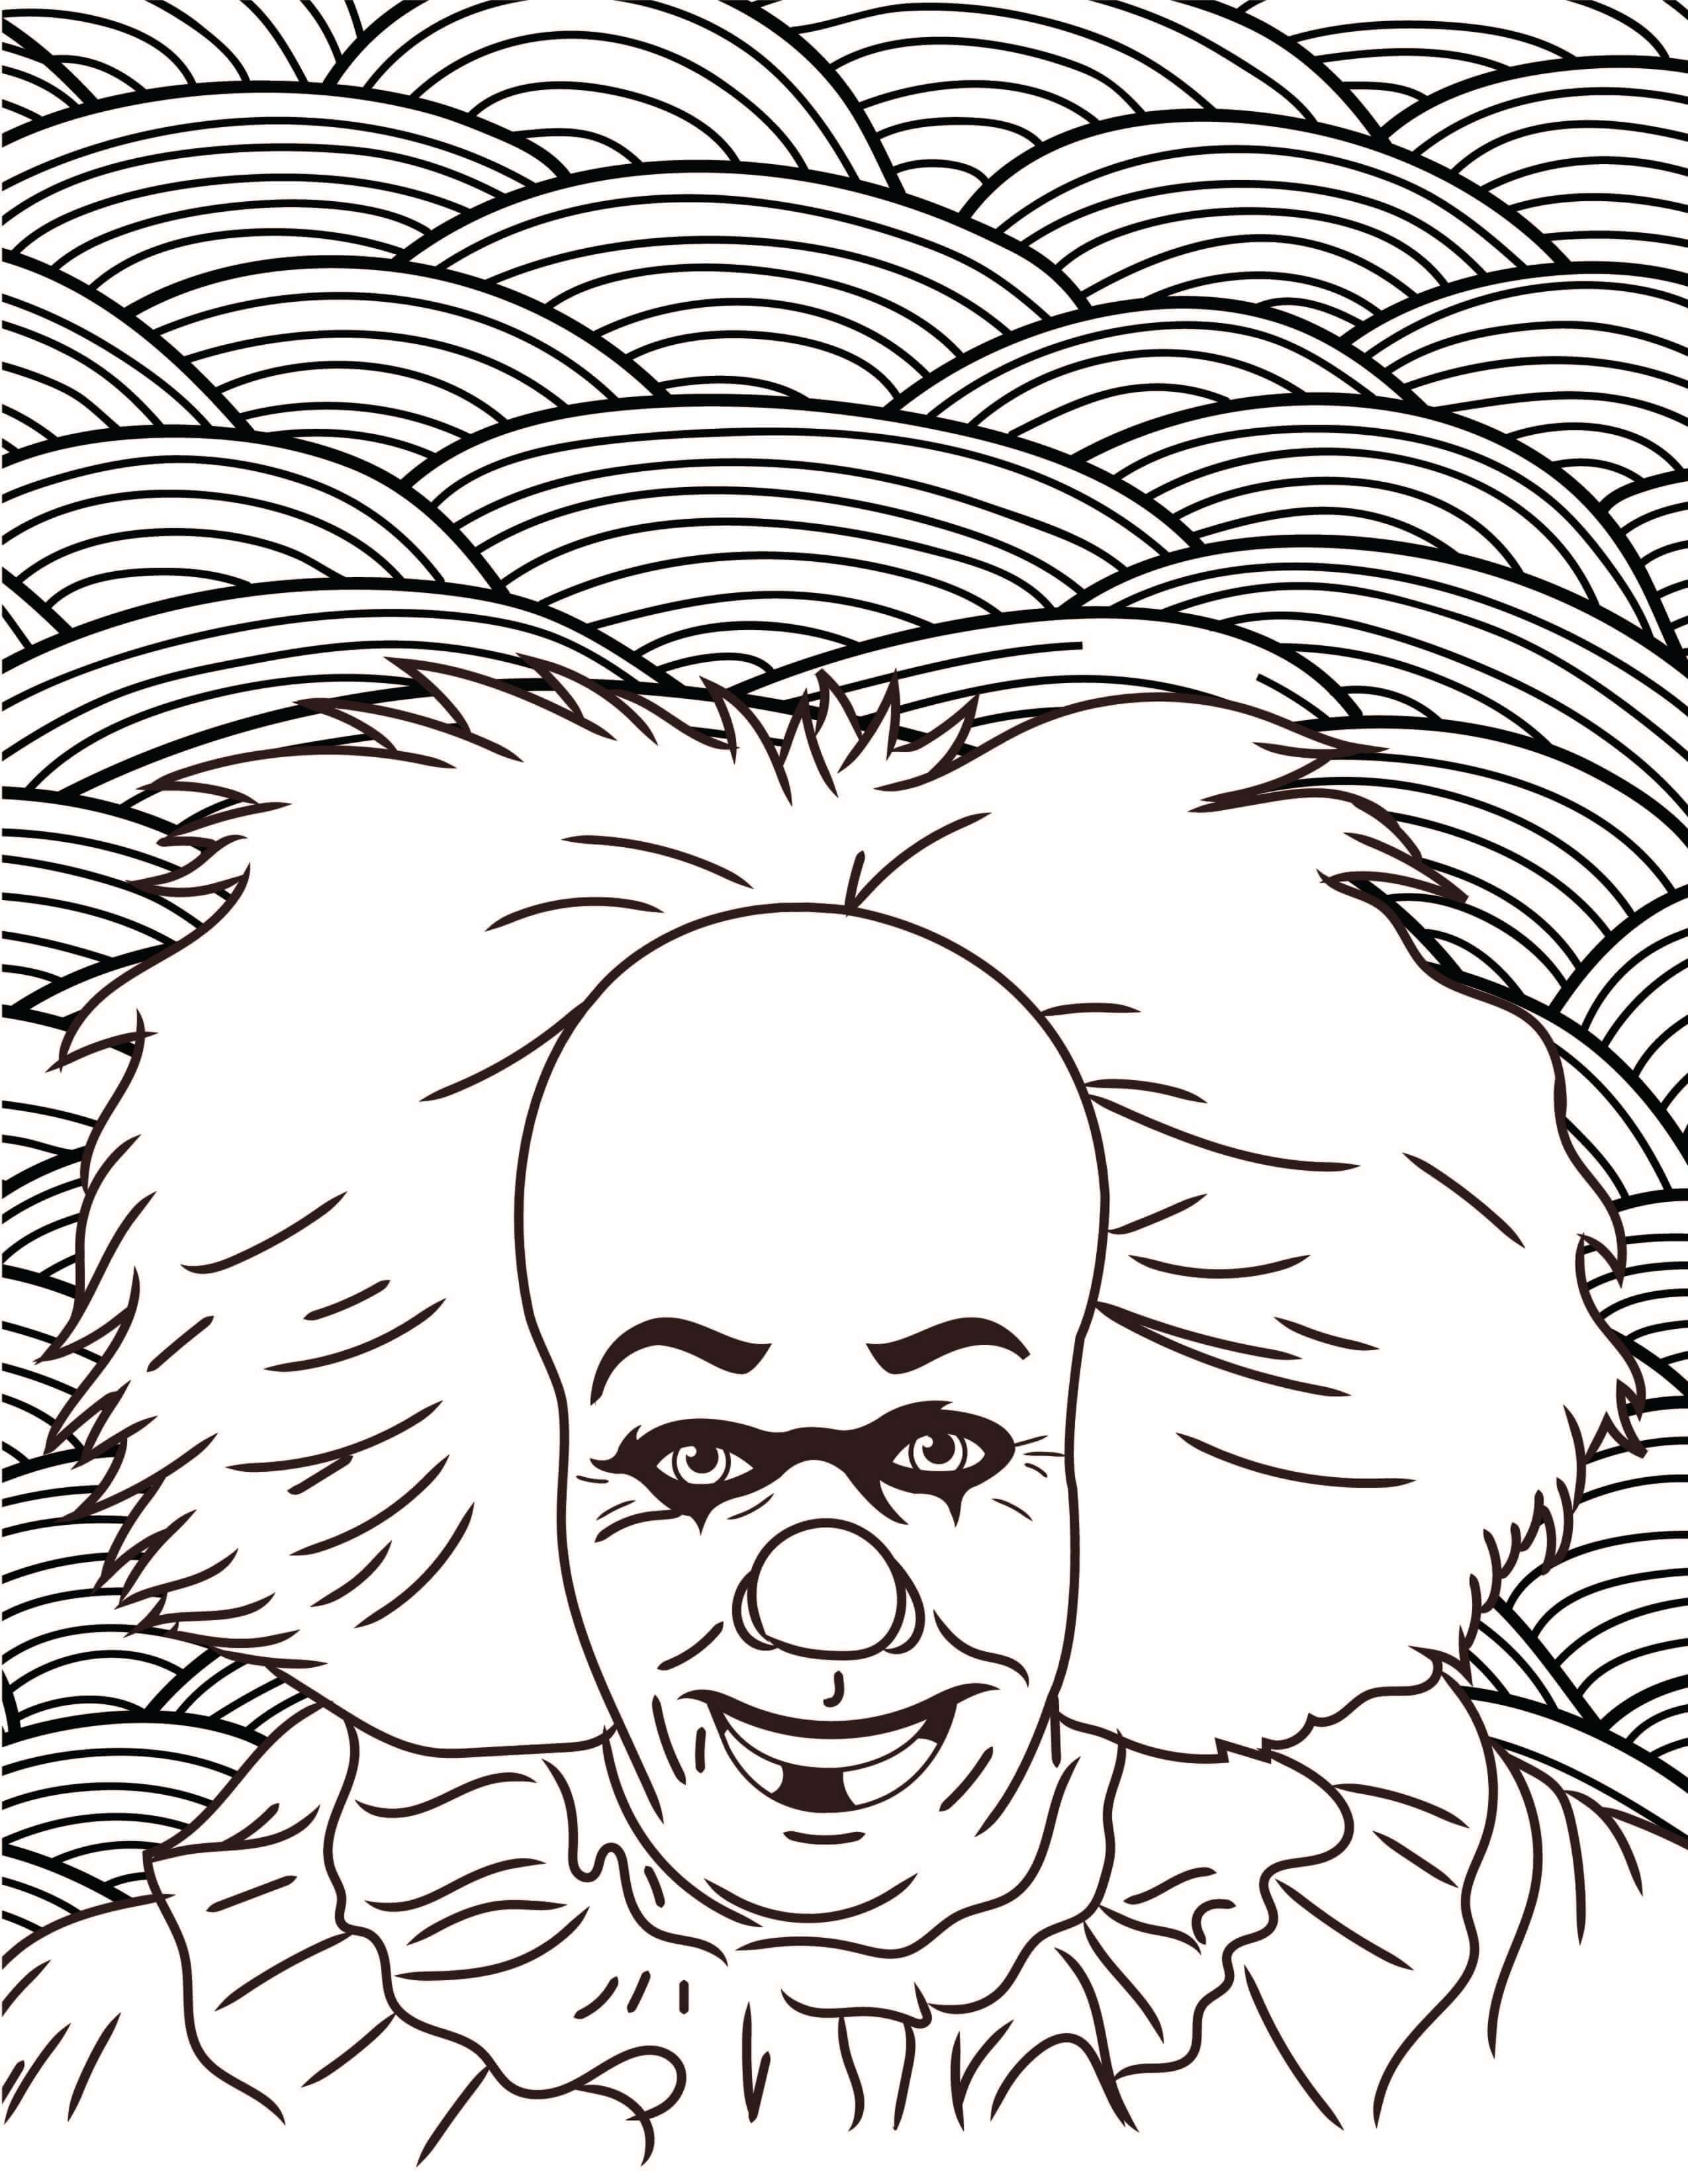 Chucky Coloring Pages at GetColorings.com | Free printable colorings